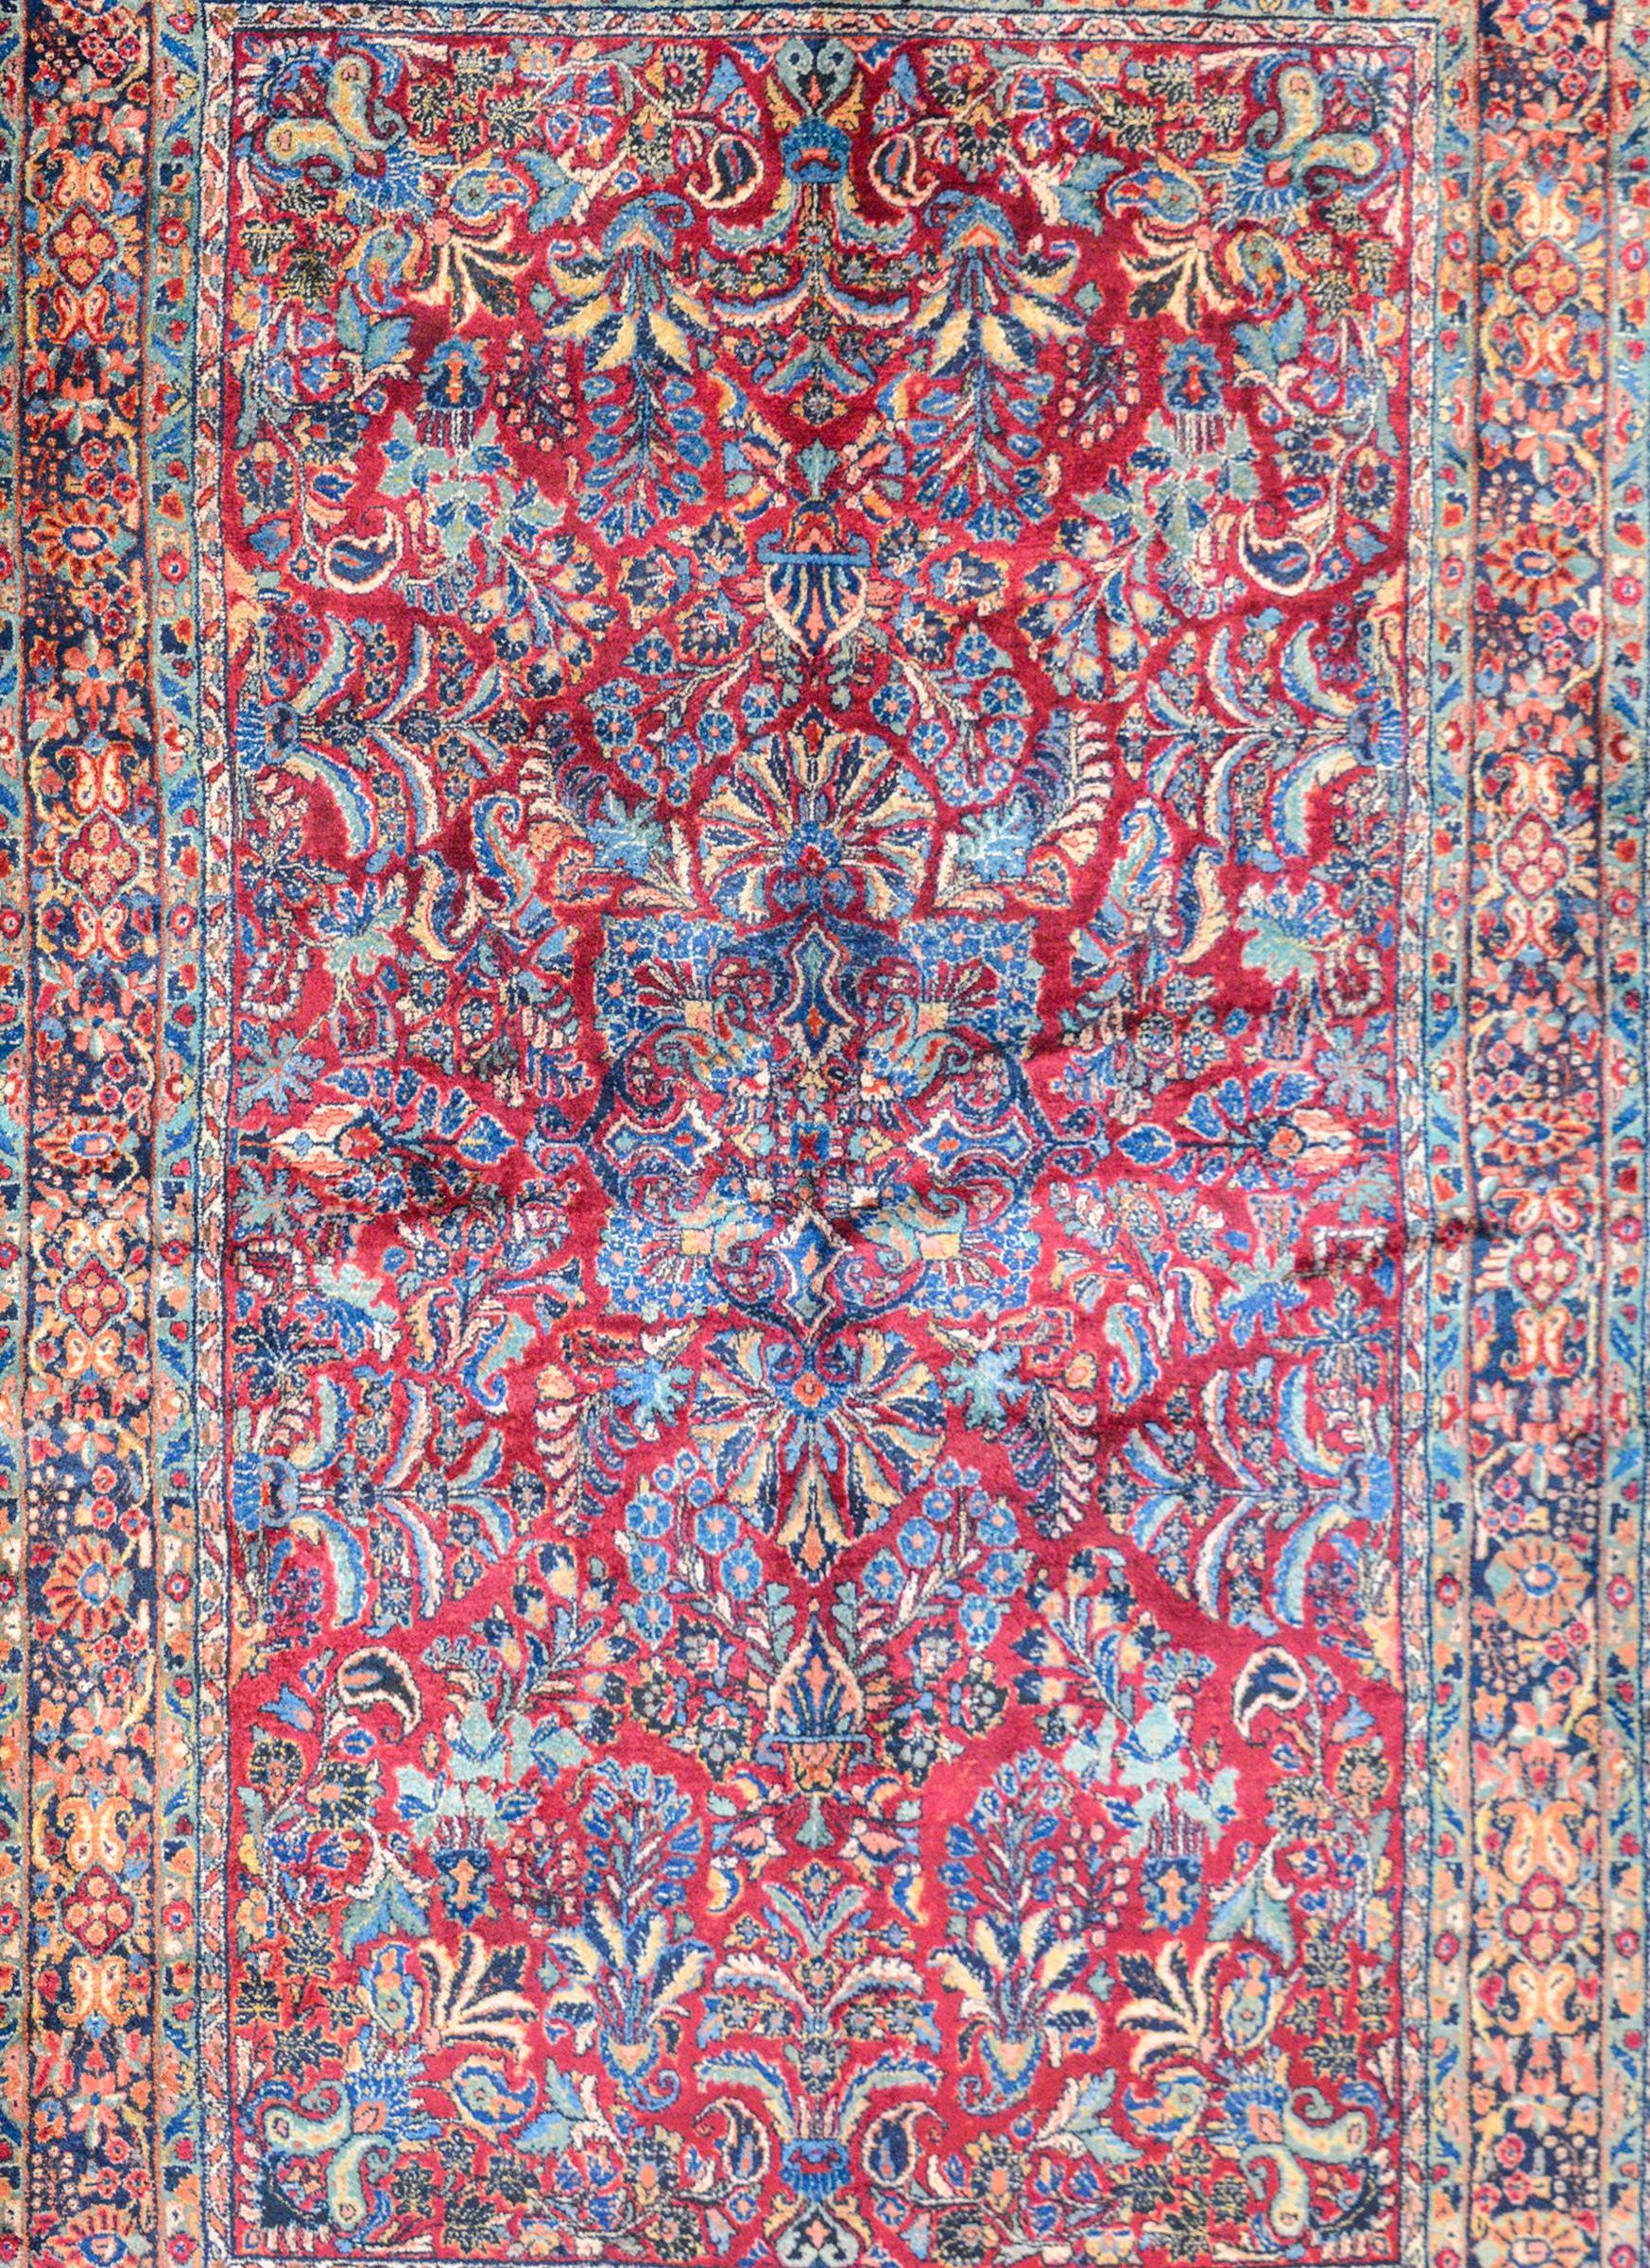 A beautiful early 20th century Persian Sarouk rug with a large-scale mirrored floral pattern woven in traditional colors of light and dark indigo, cream, and pink, against a rich cranberry colored background. The border is complex with multiple